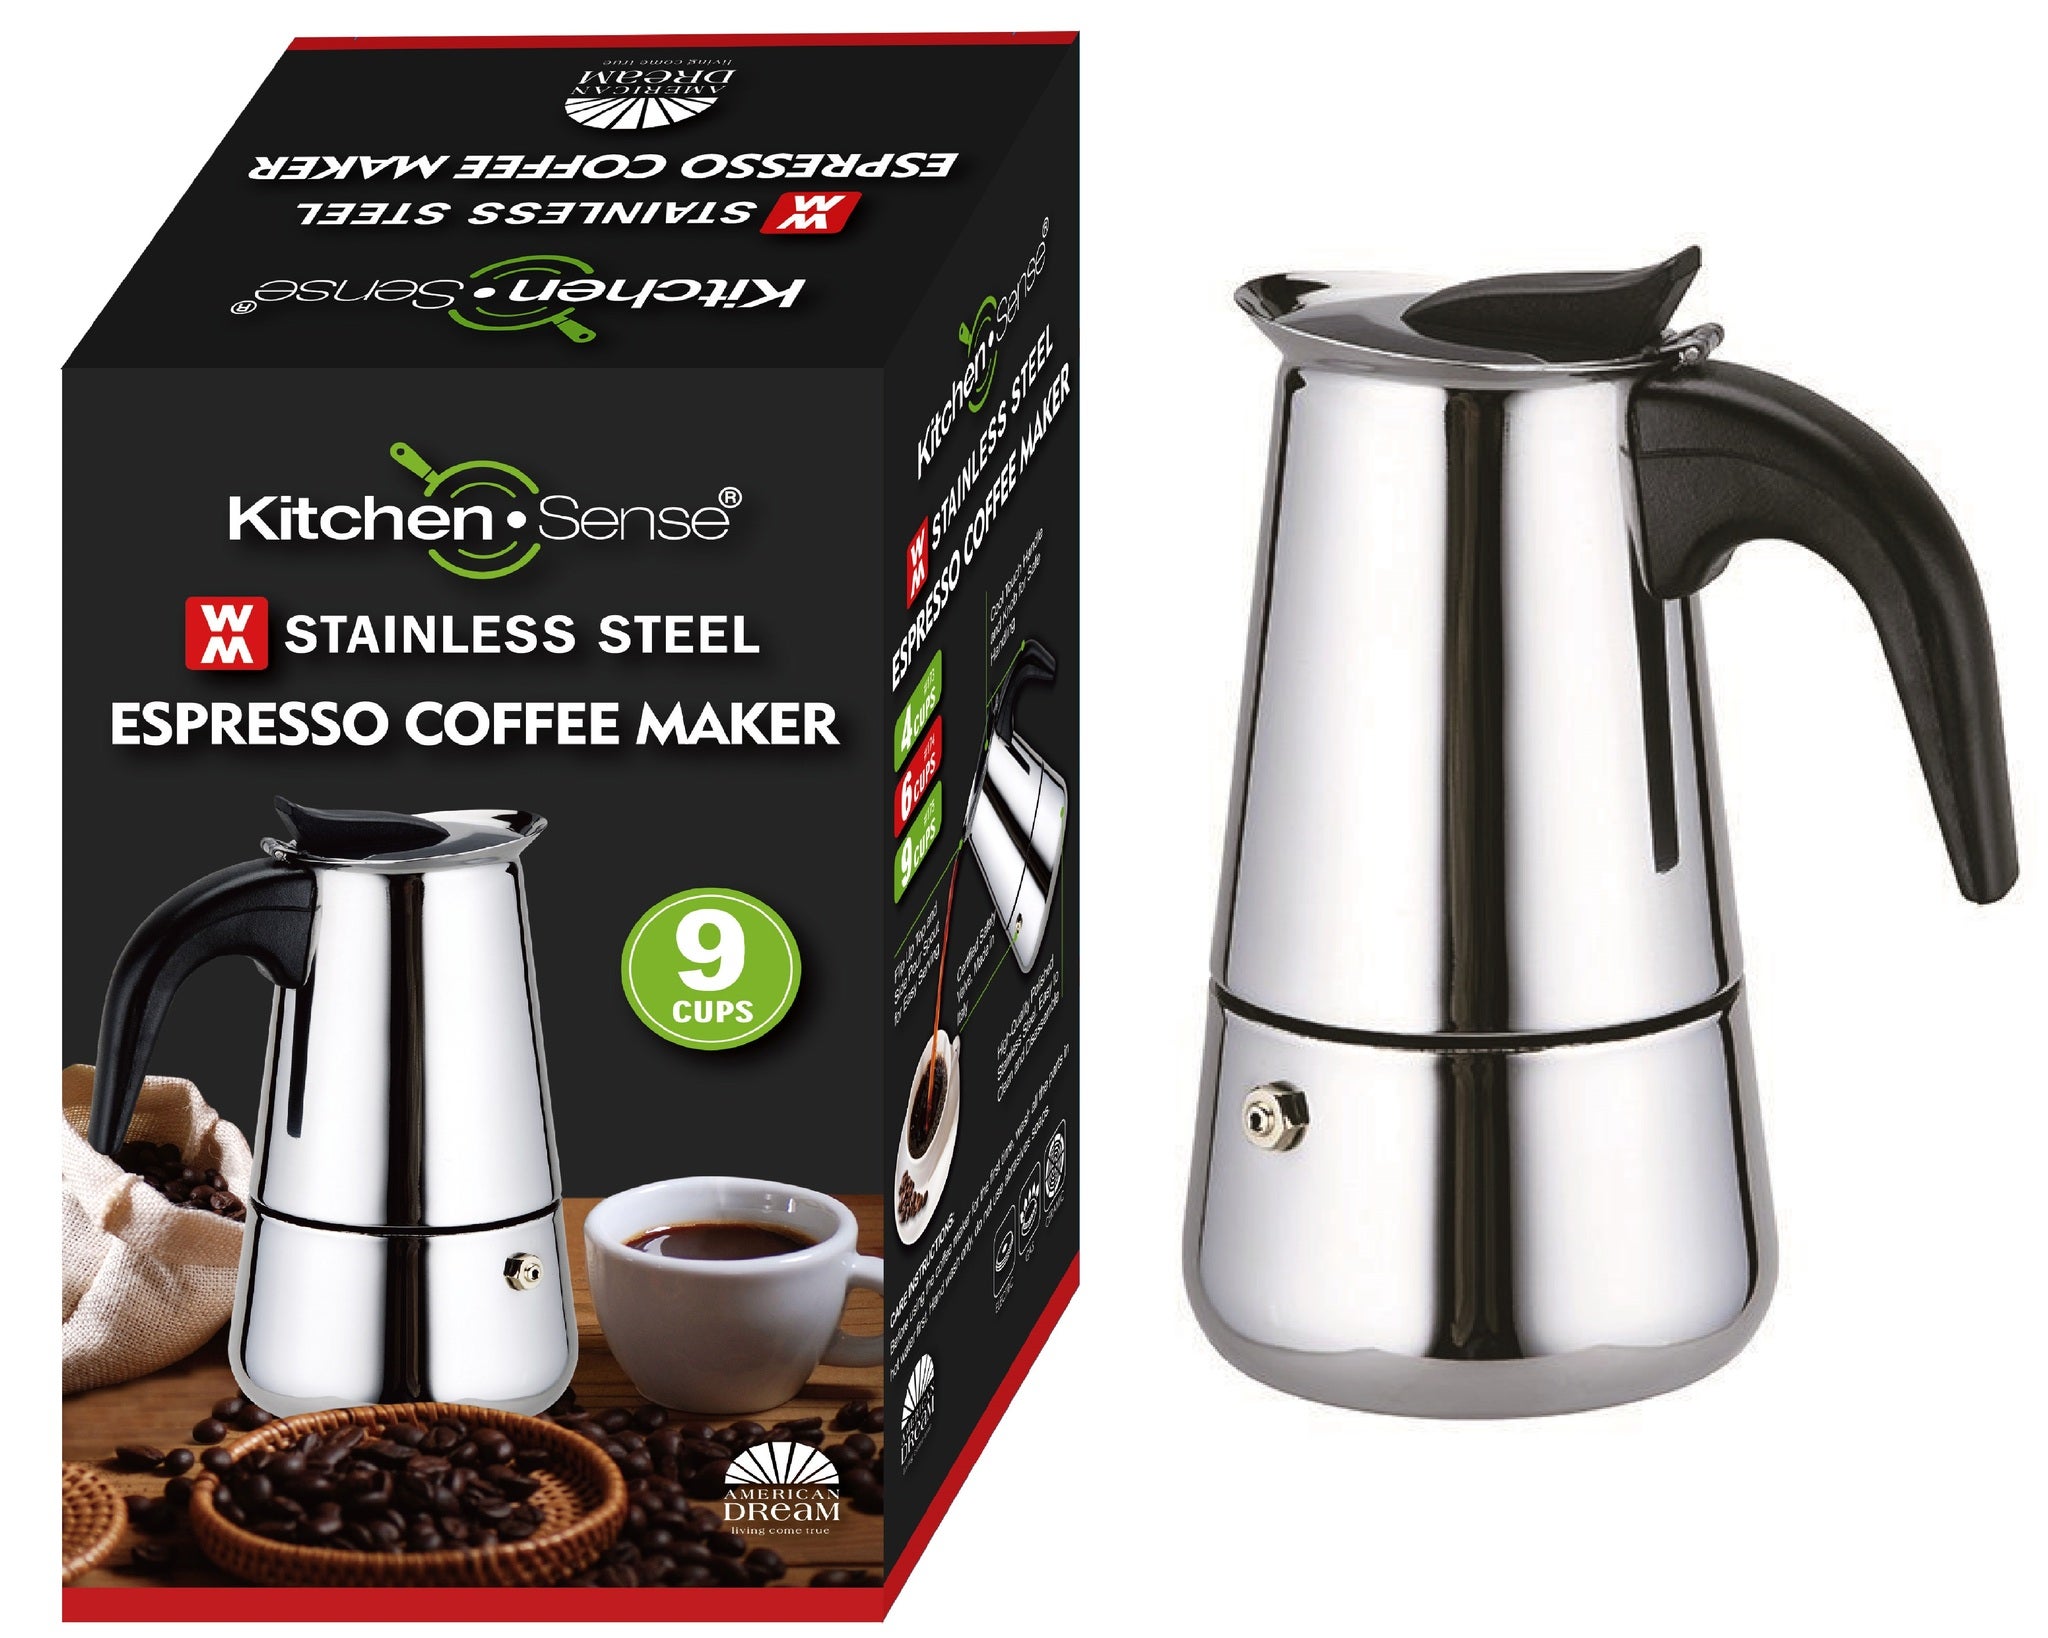 9 cup Coffee Maker - appliances - by owner - sale - craigslist